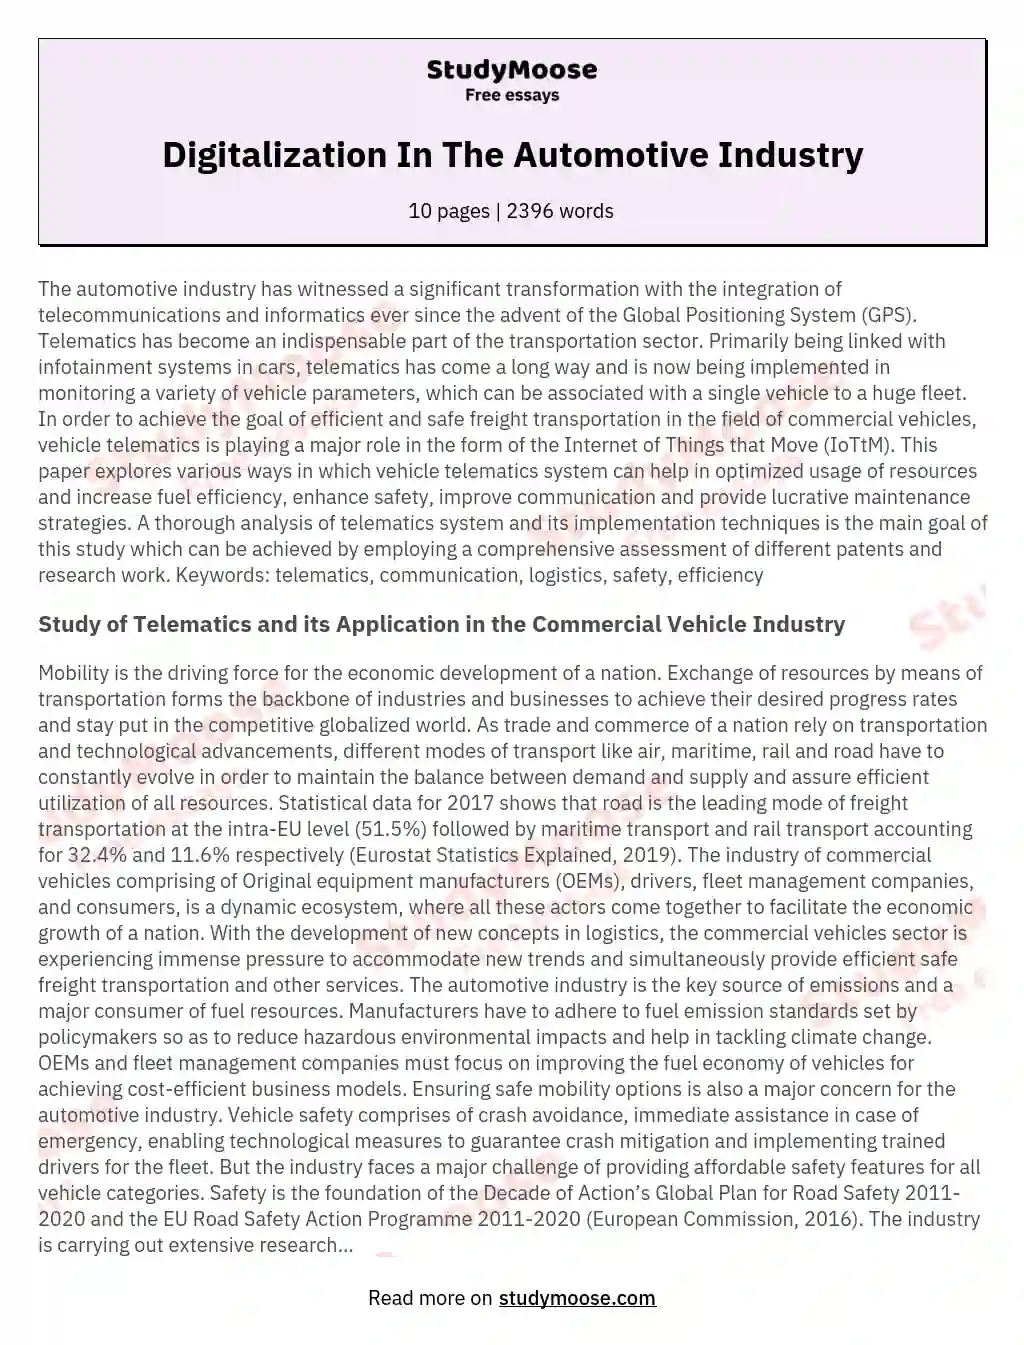 Digitalization In The Automotive Industry essay